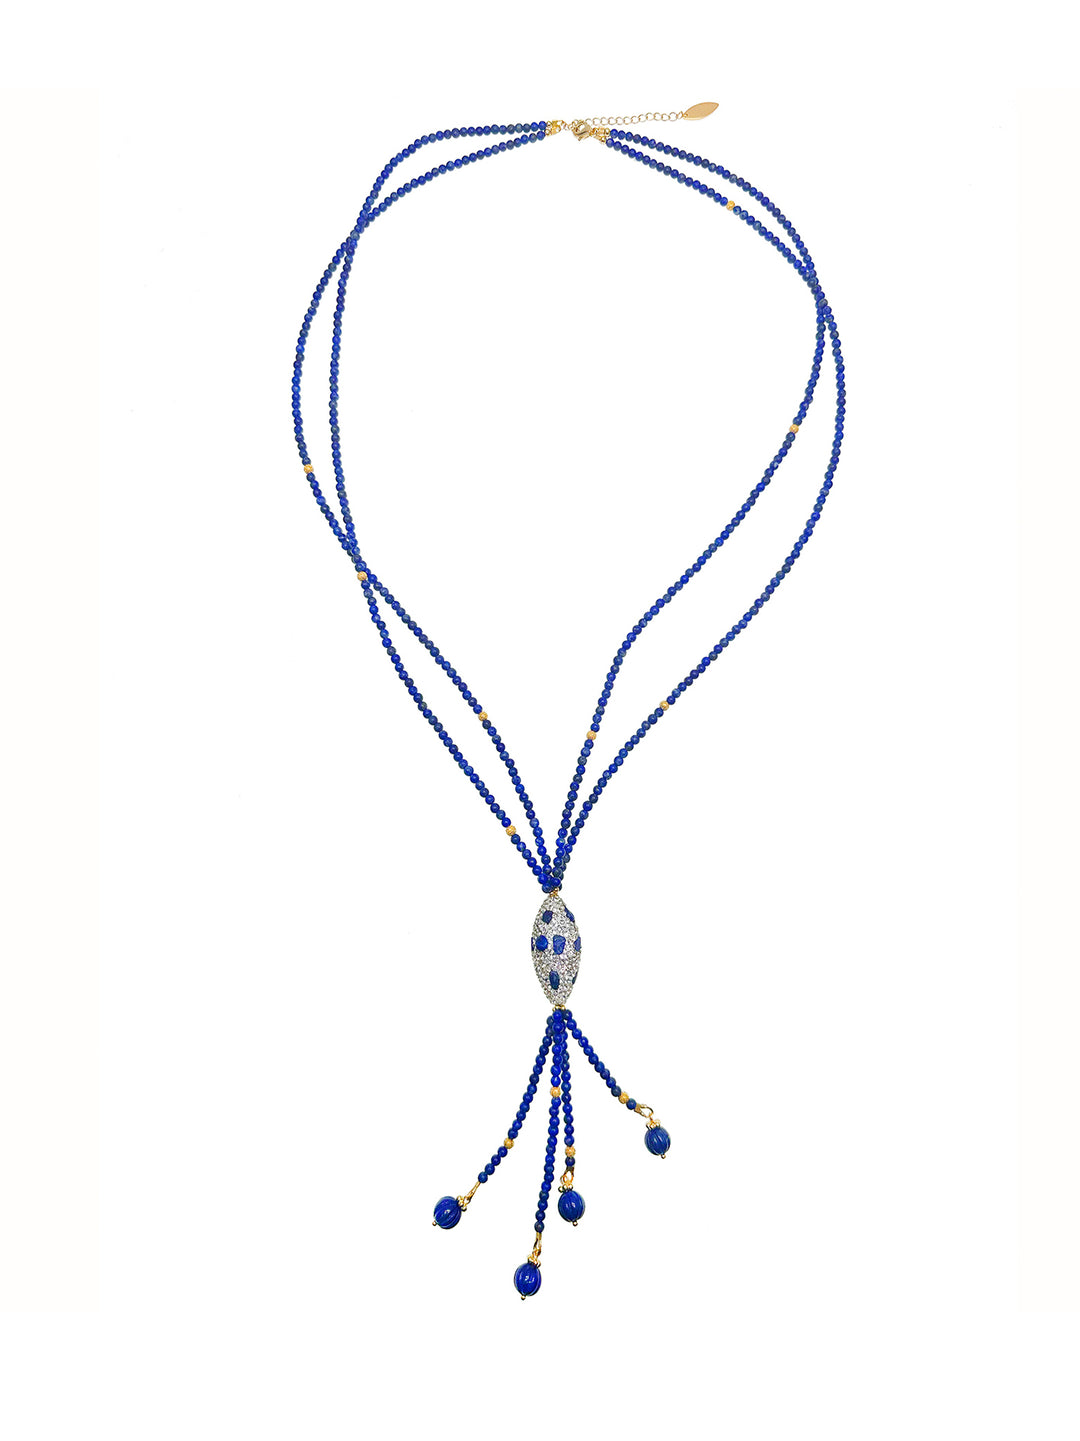 Y shaped Lapis with Rhinestone Necklace JN029 - FARRA